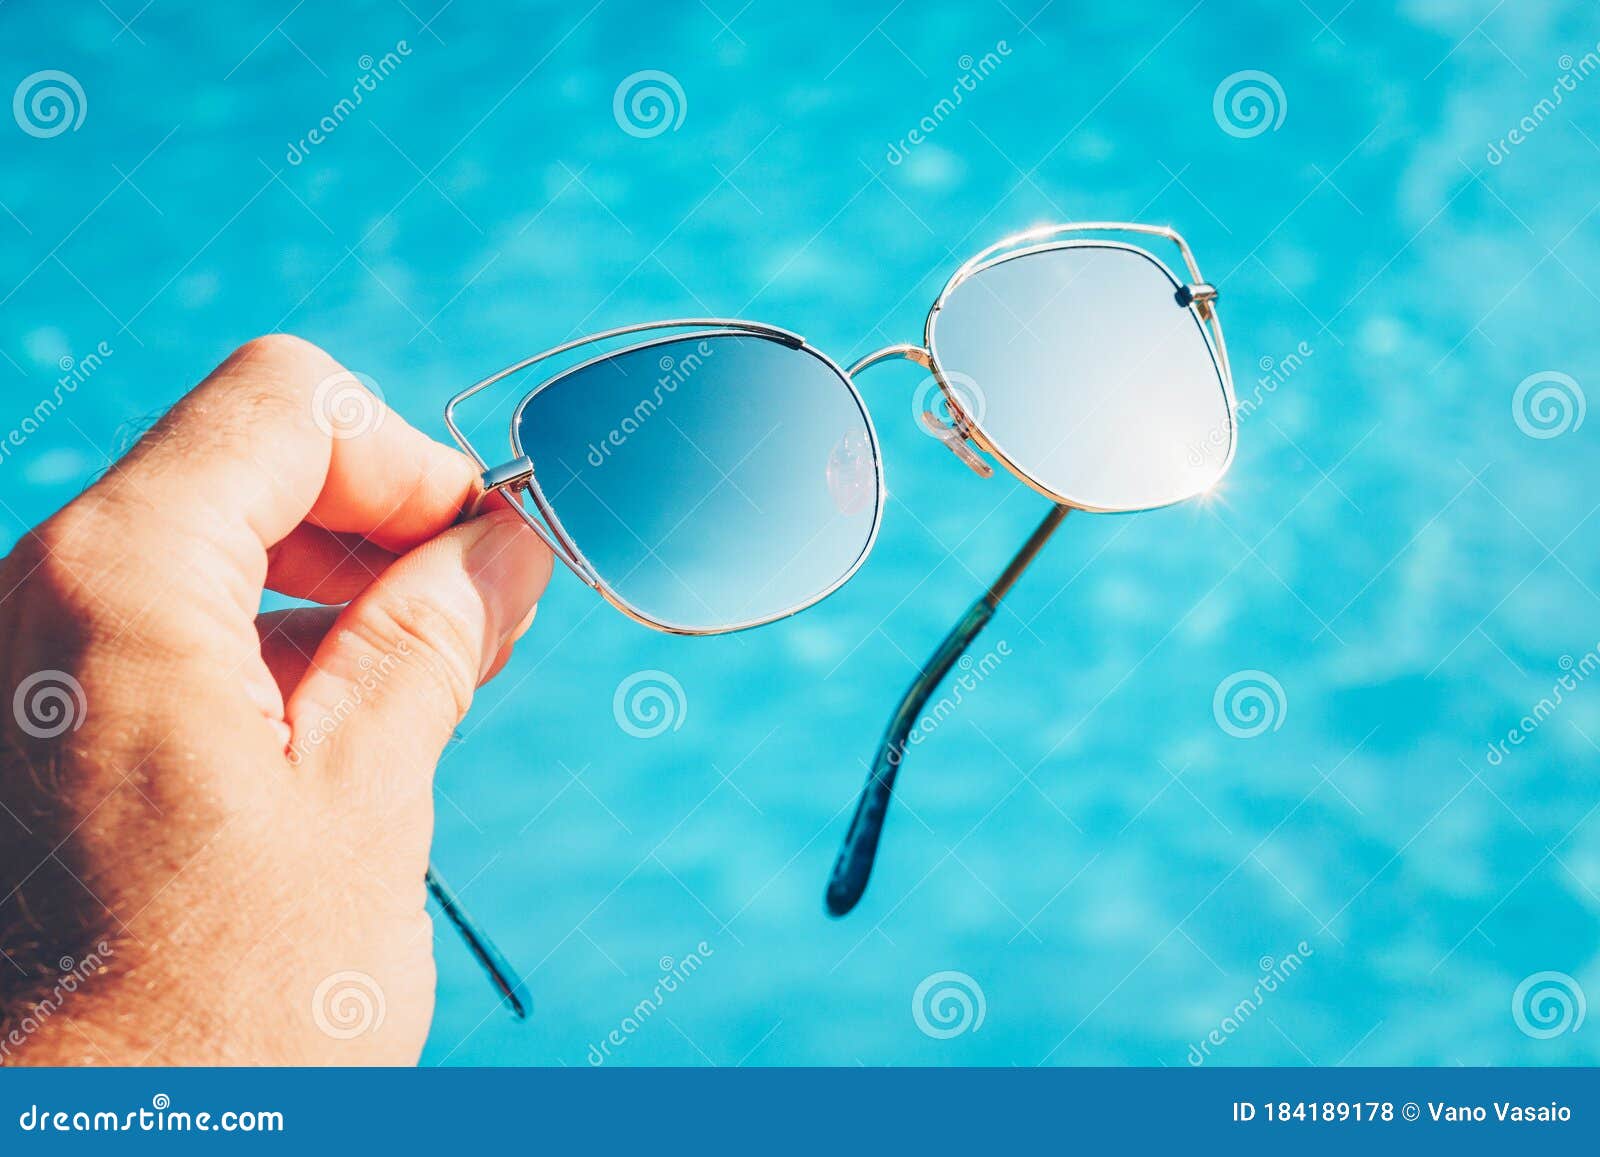 Expensive Fashionable Sunglasses with Metal Arms in Hand Stock Photo ...